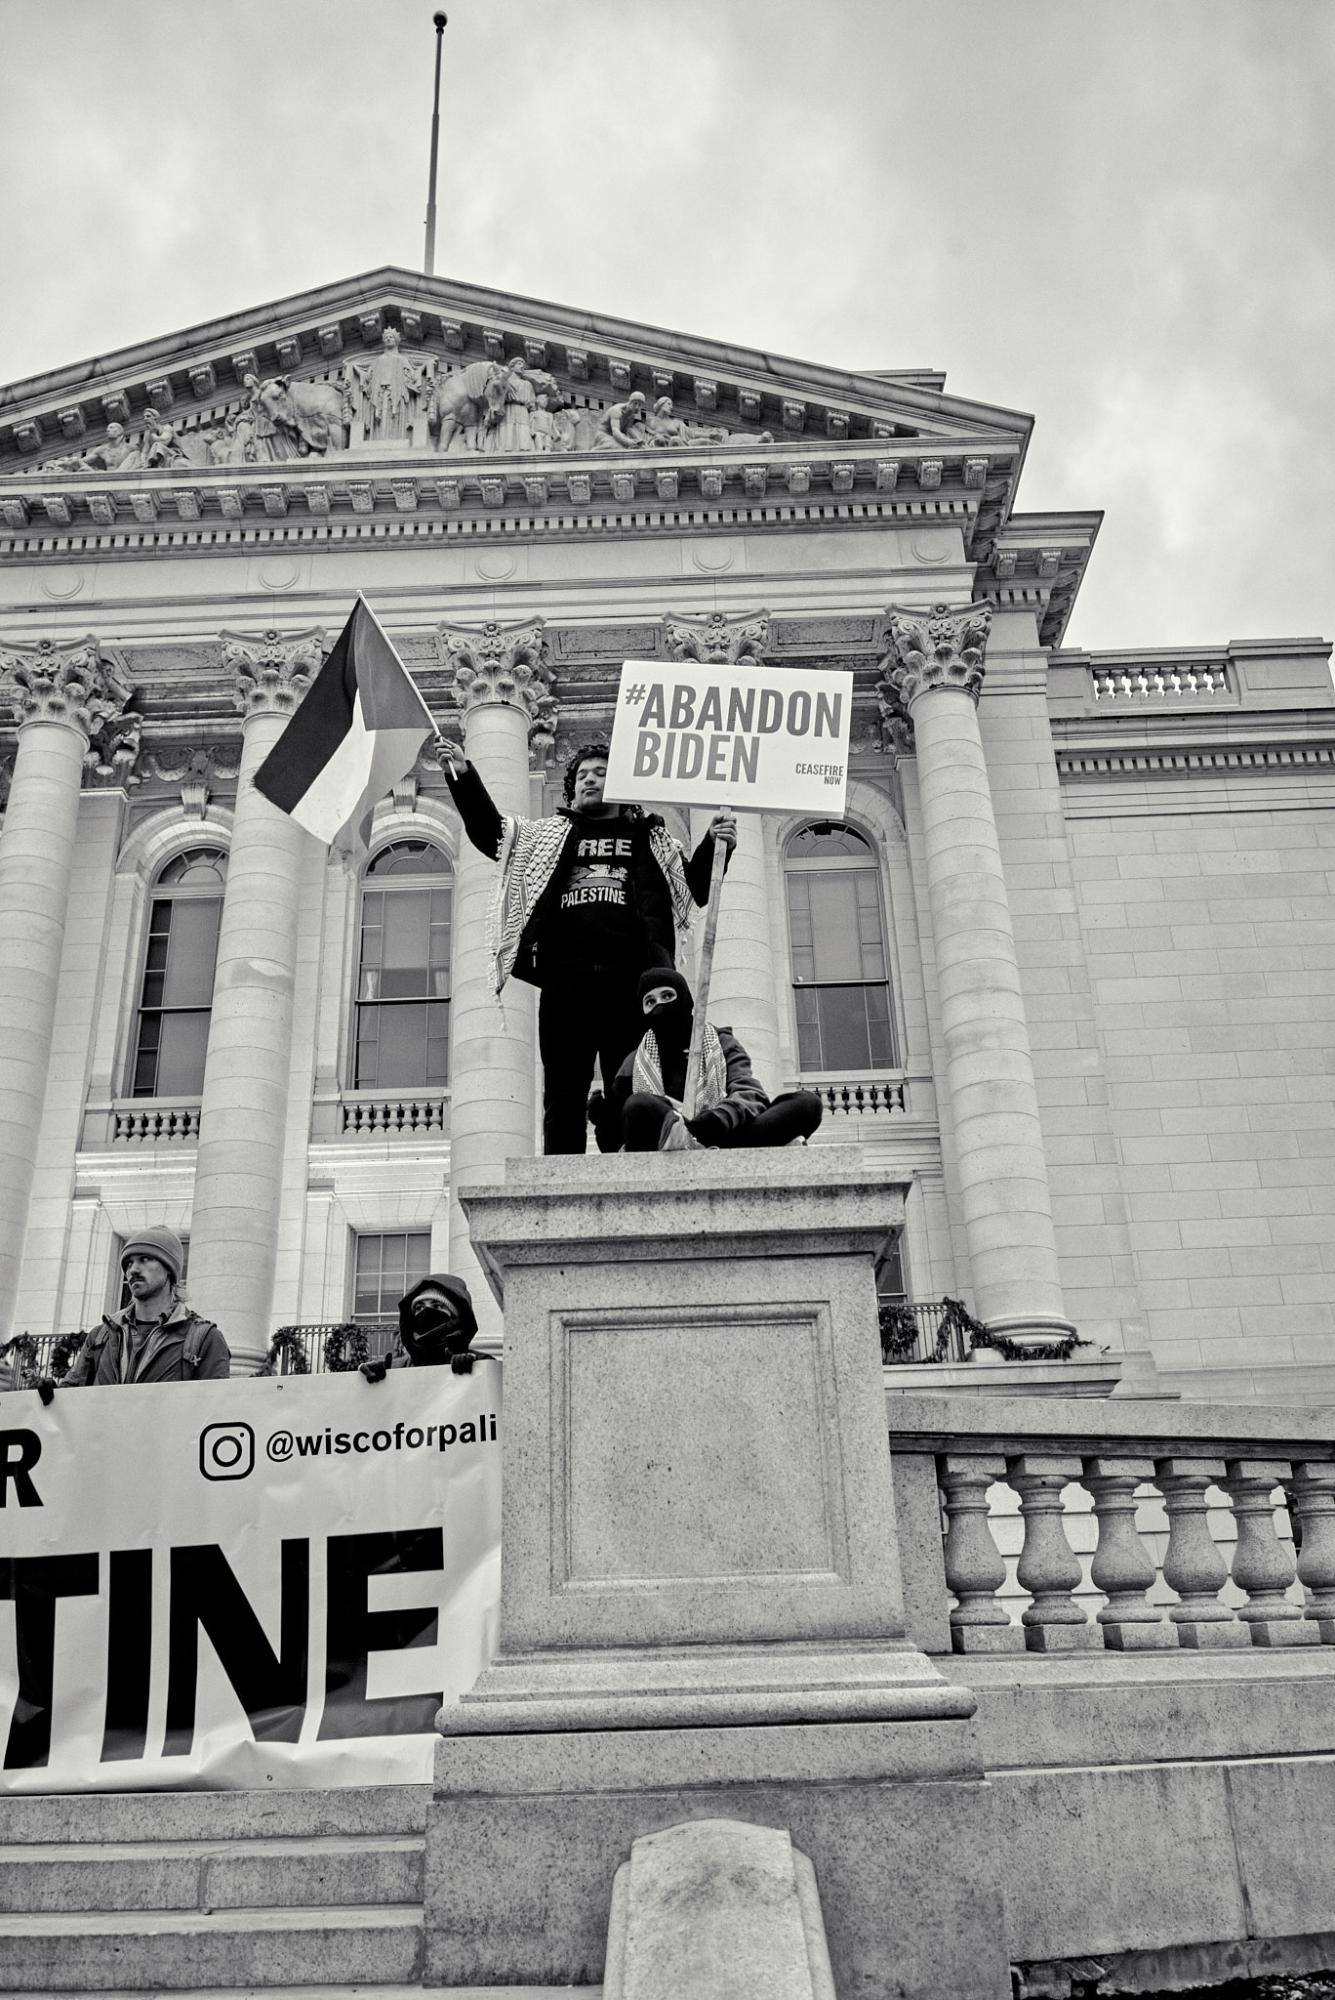 Wisconsin All out for Palestine Rally and March